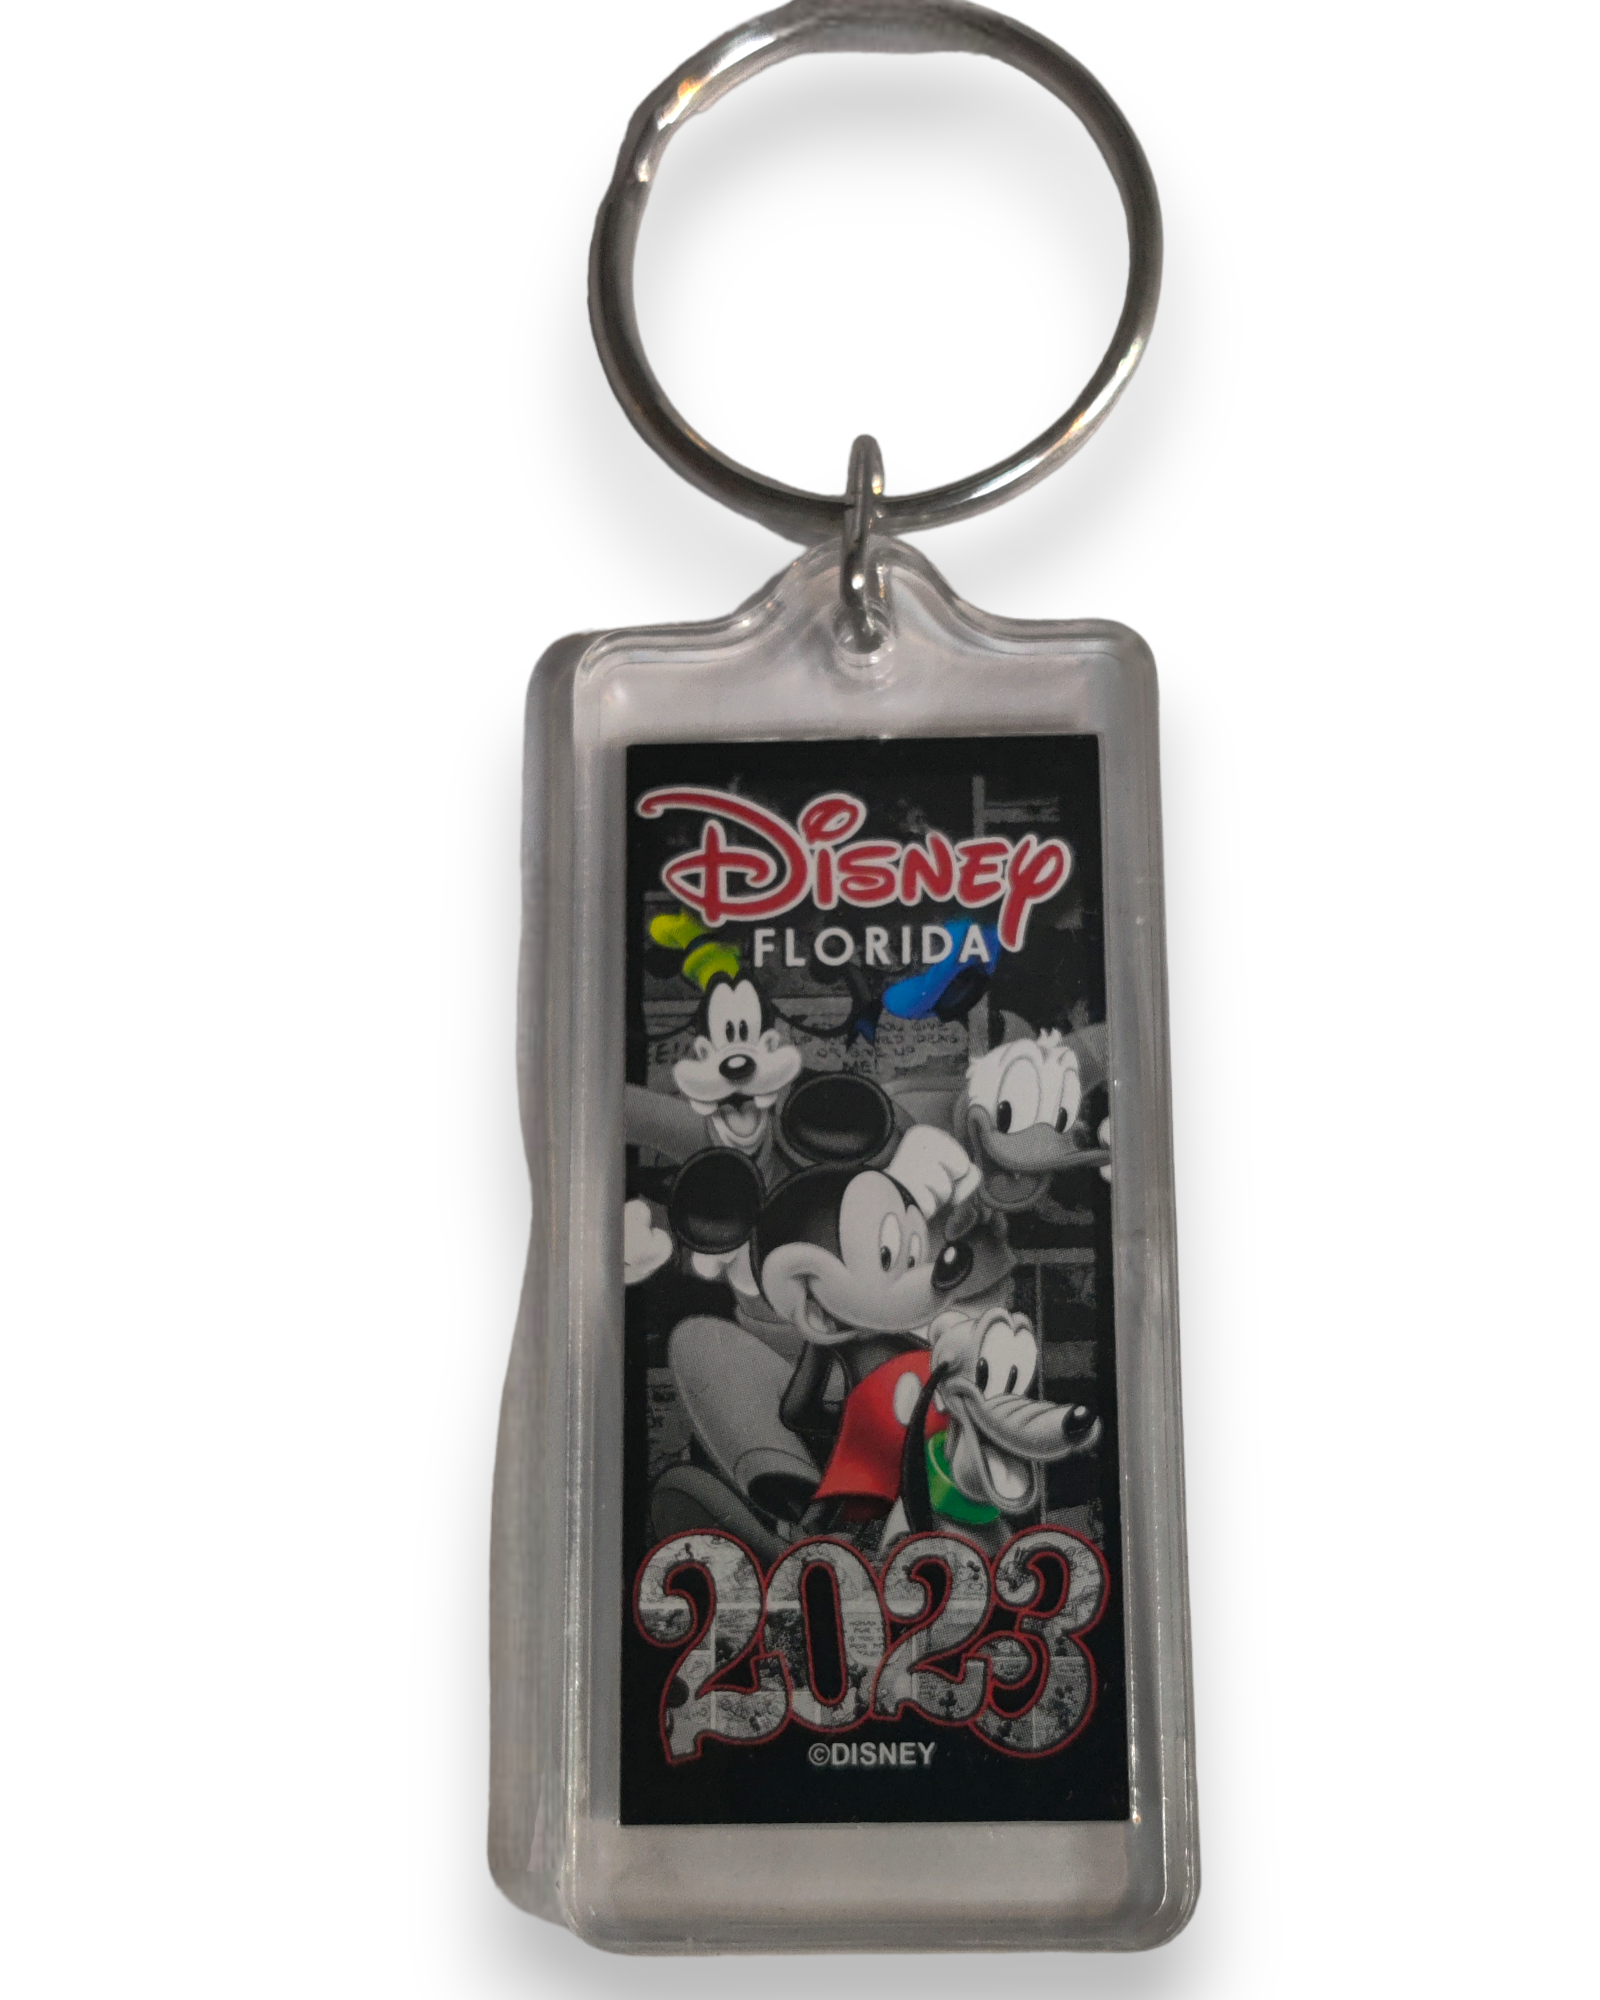 2023 Disney Florida Souvenir Keychain with Mickey and Friends, Party Lucite  Key Ring